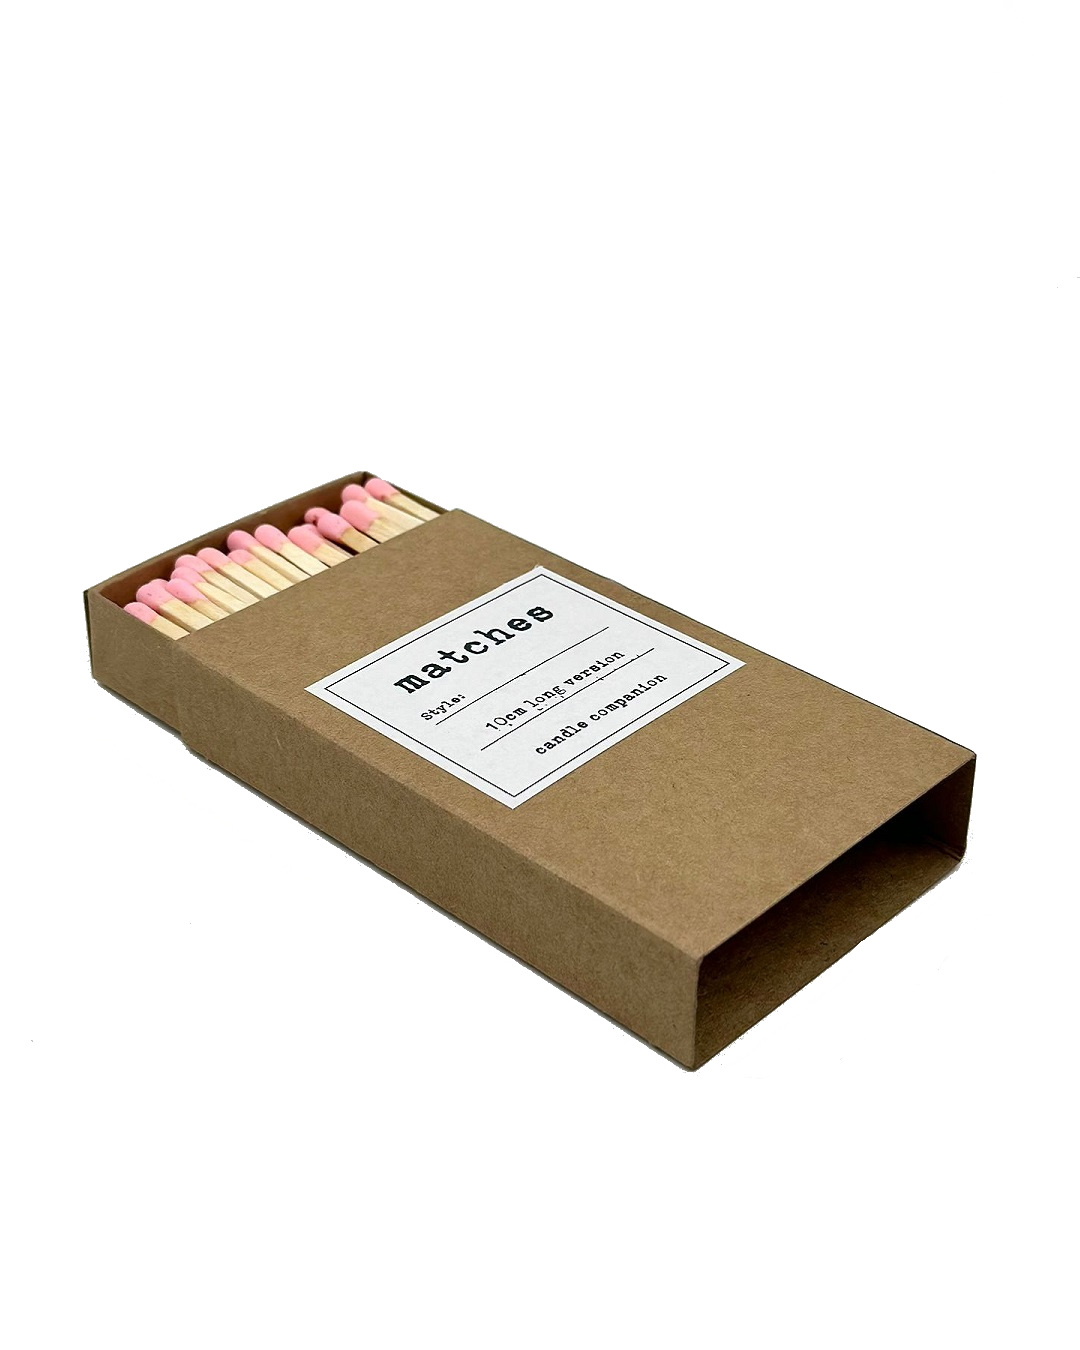 Pink matches in a box